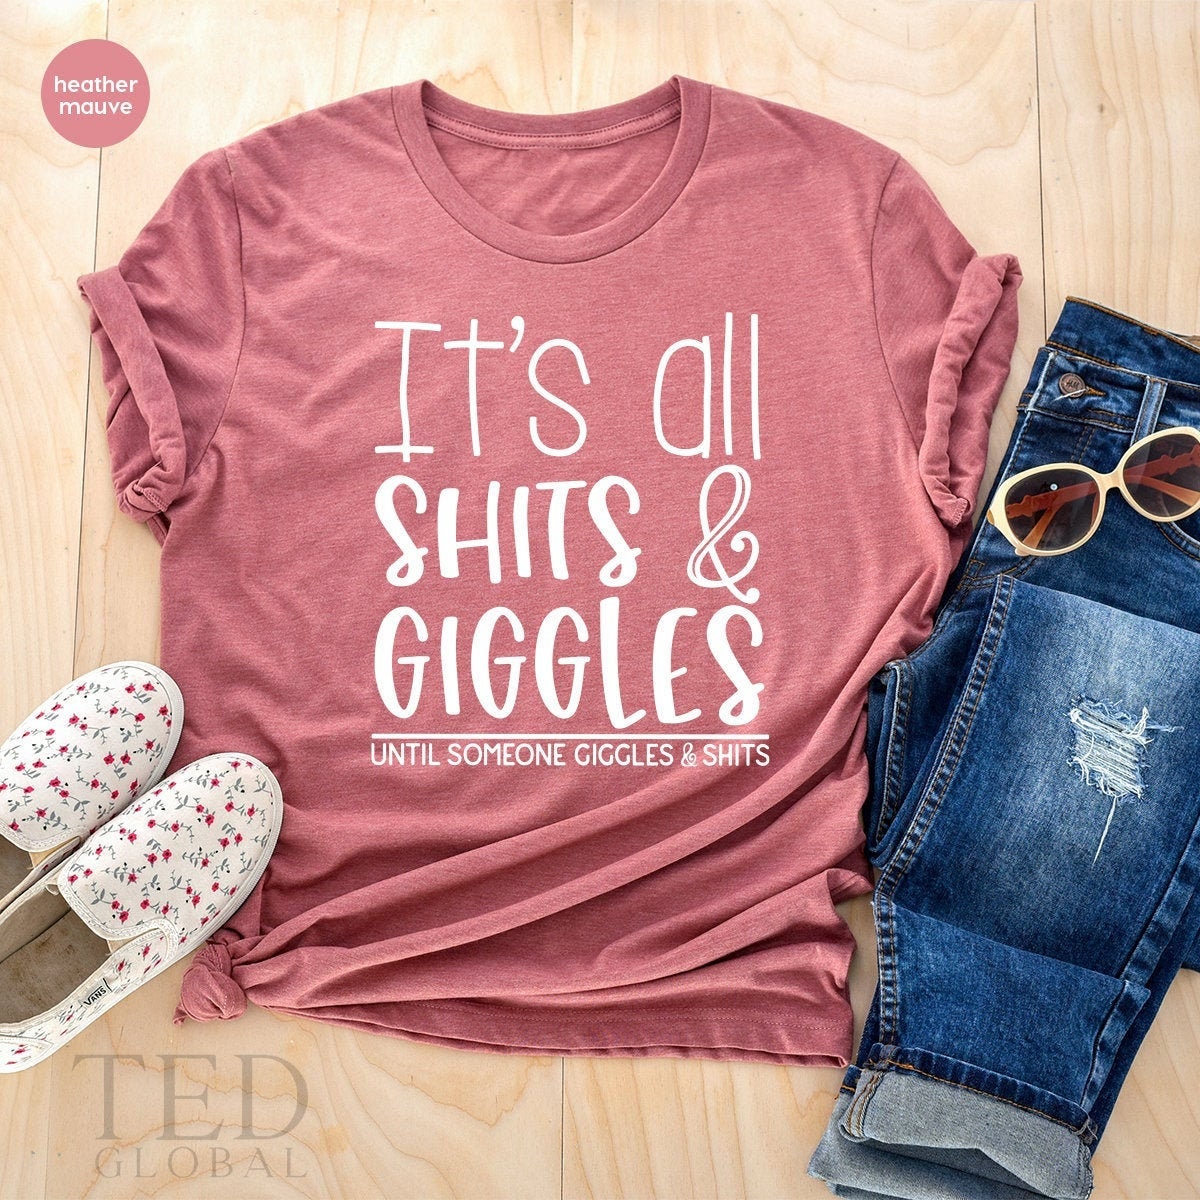 Funny Saying Shirt, Sarcastic T-Shirt, Mothers Day Gift, Adult Humor T Shirt, Shits And Giggles Tee, Sassy Quote Shirt, Funny T-Shirt Women - Fastdeliverytees.com